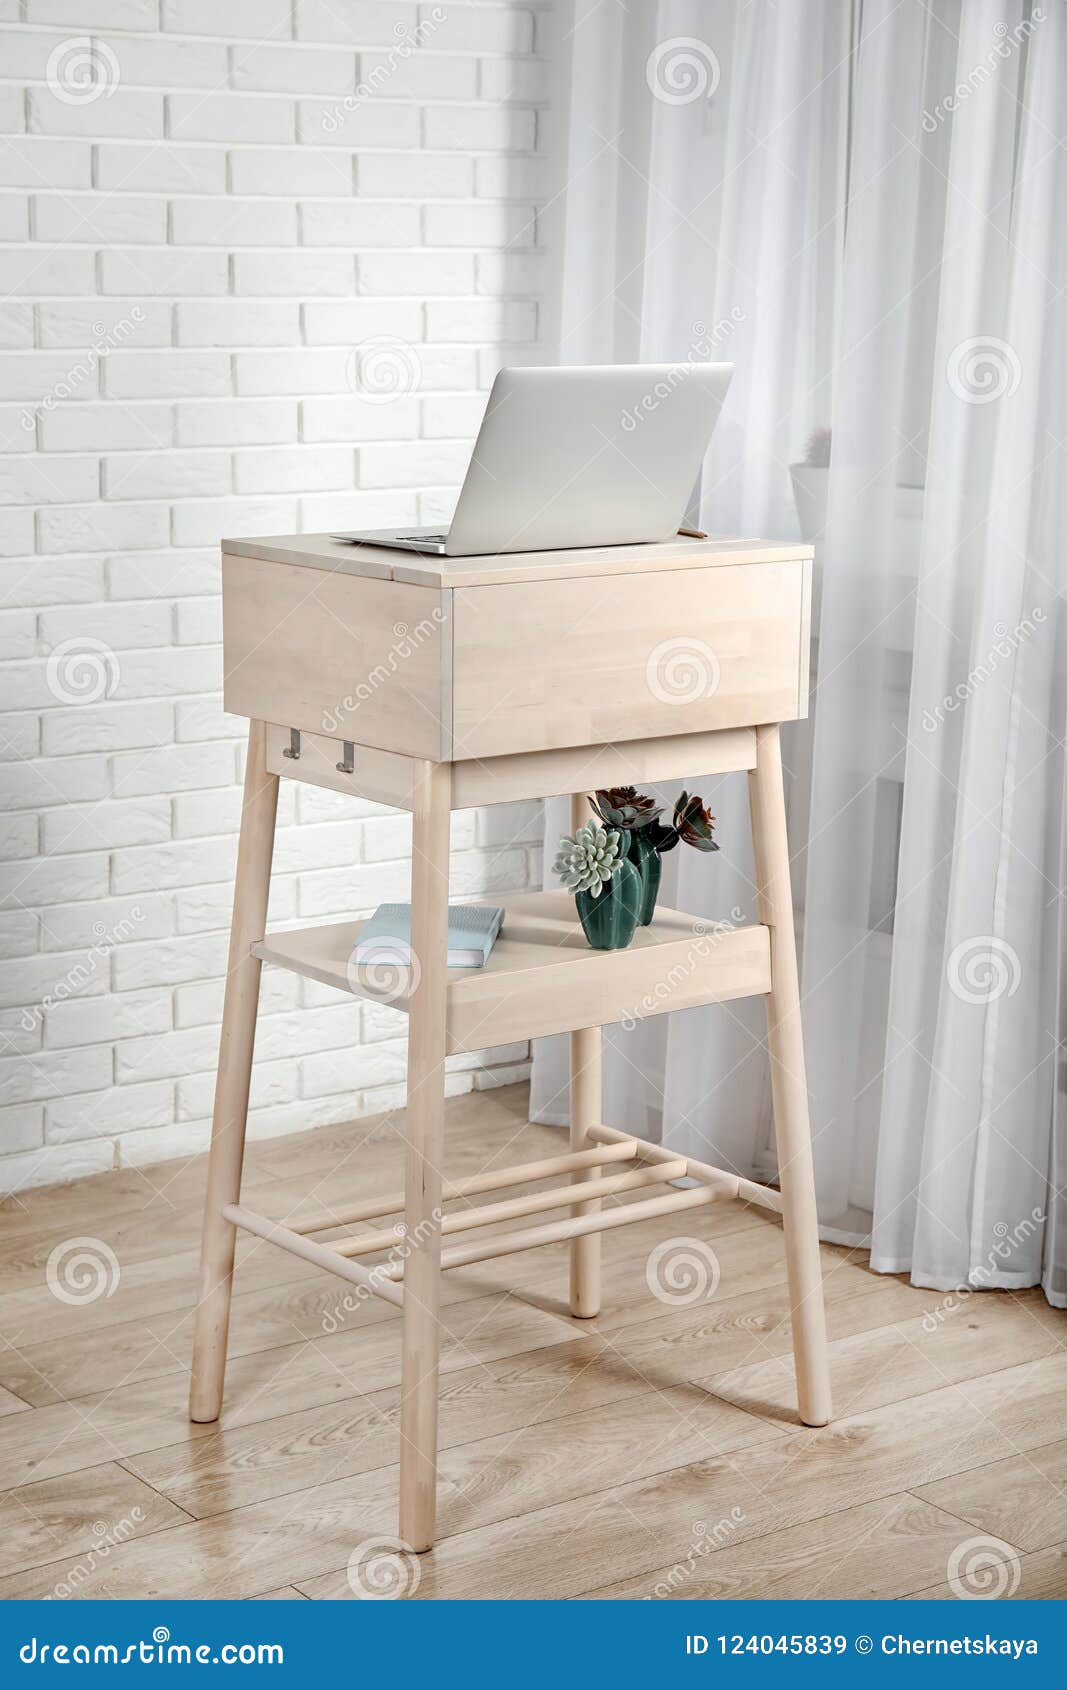 High Wooden Table With Laptop As Stand Up I Stock Image Image Of